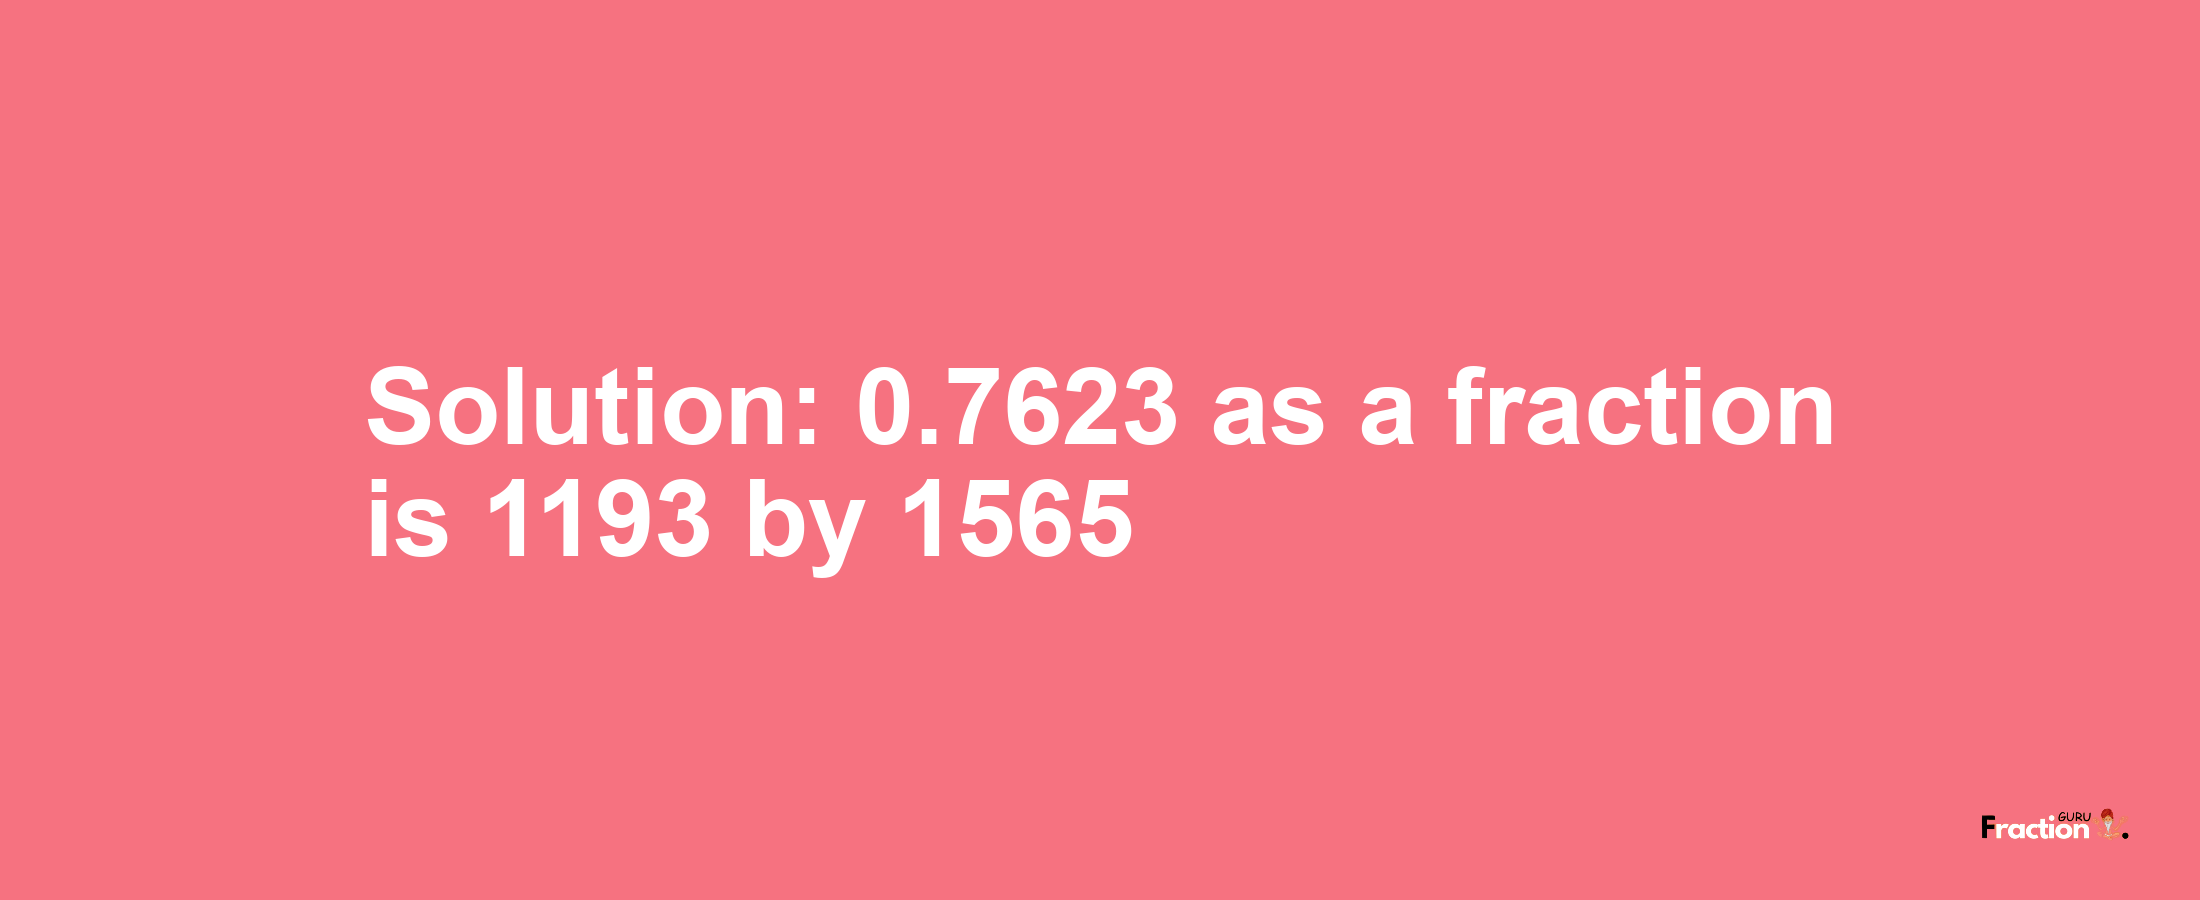 Solution:0.7623 as a fraction is 1193/1565